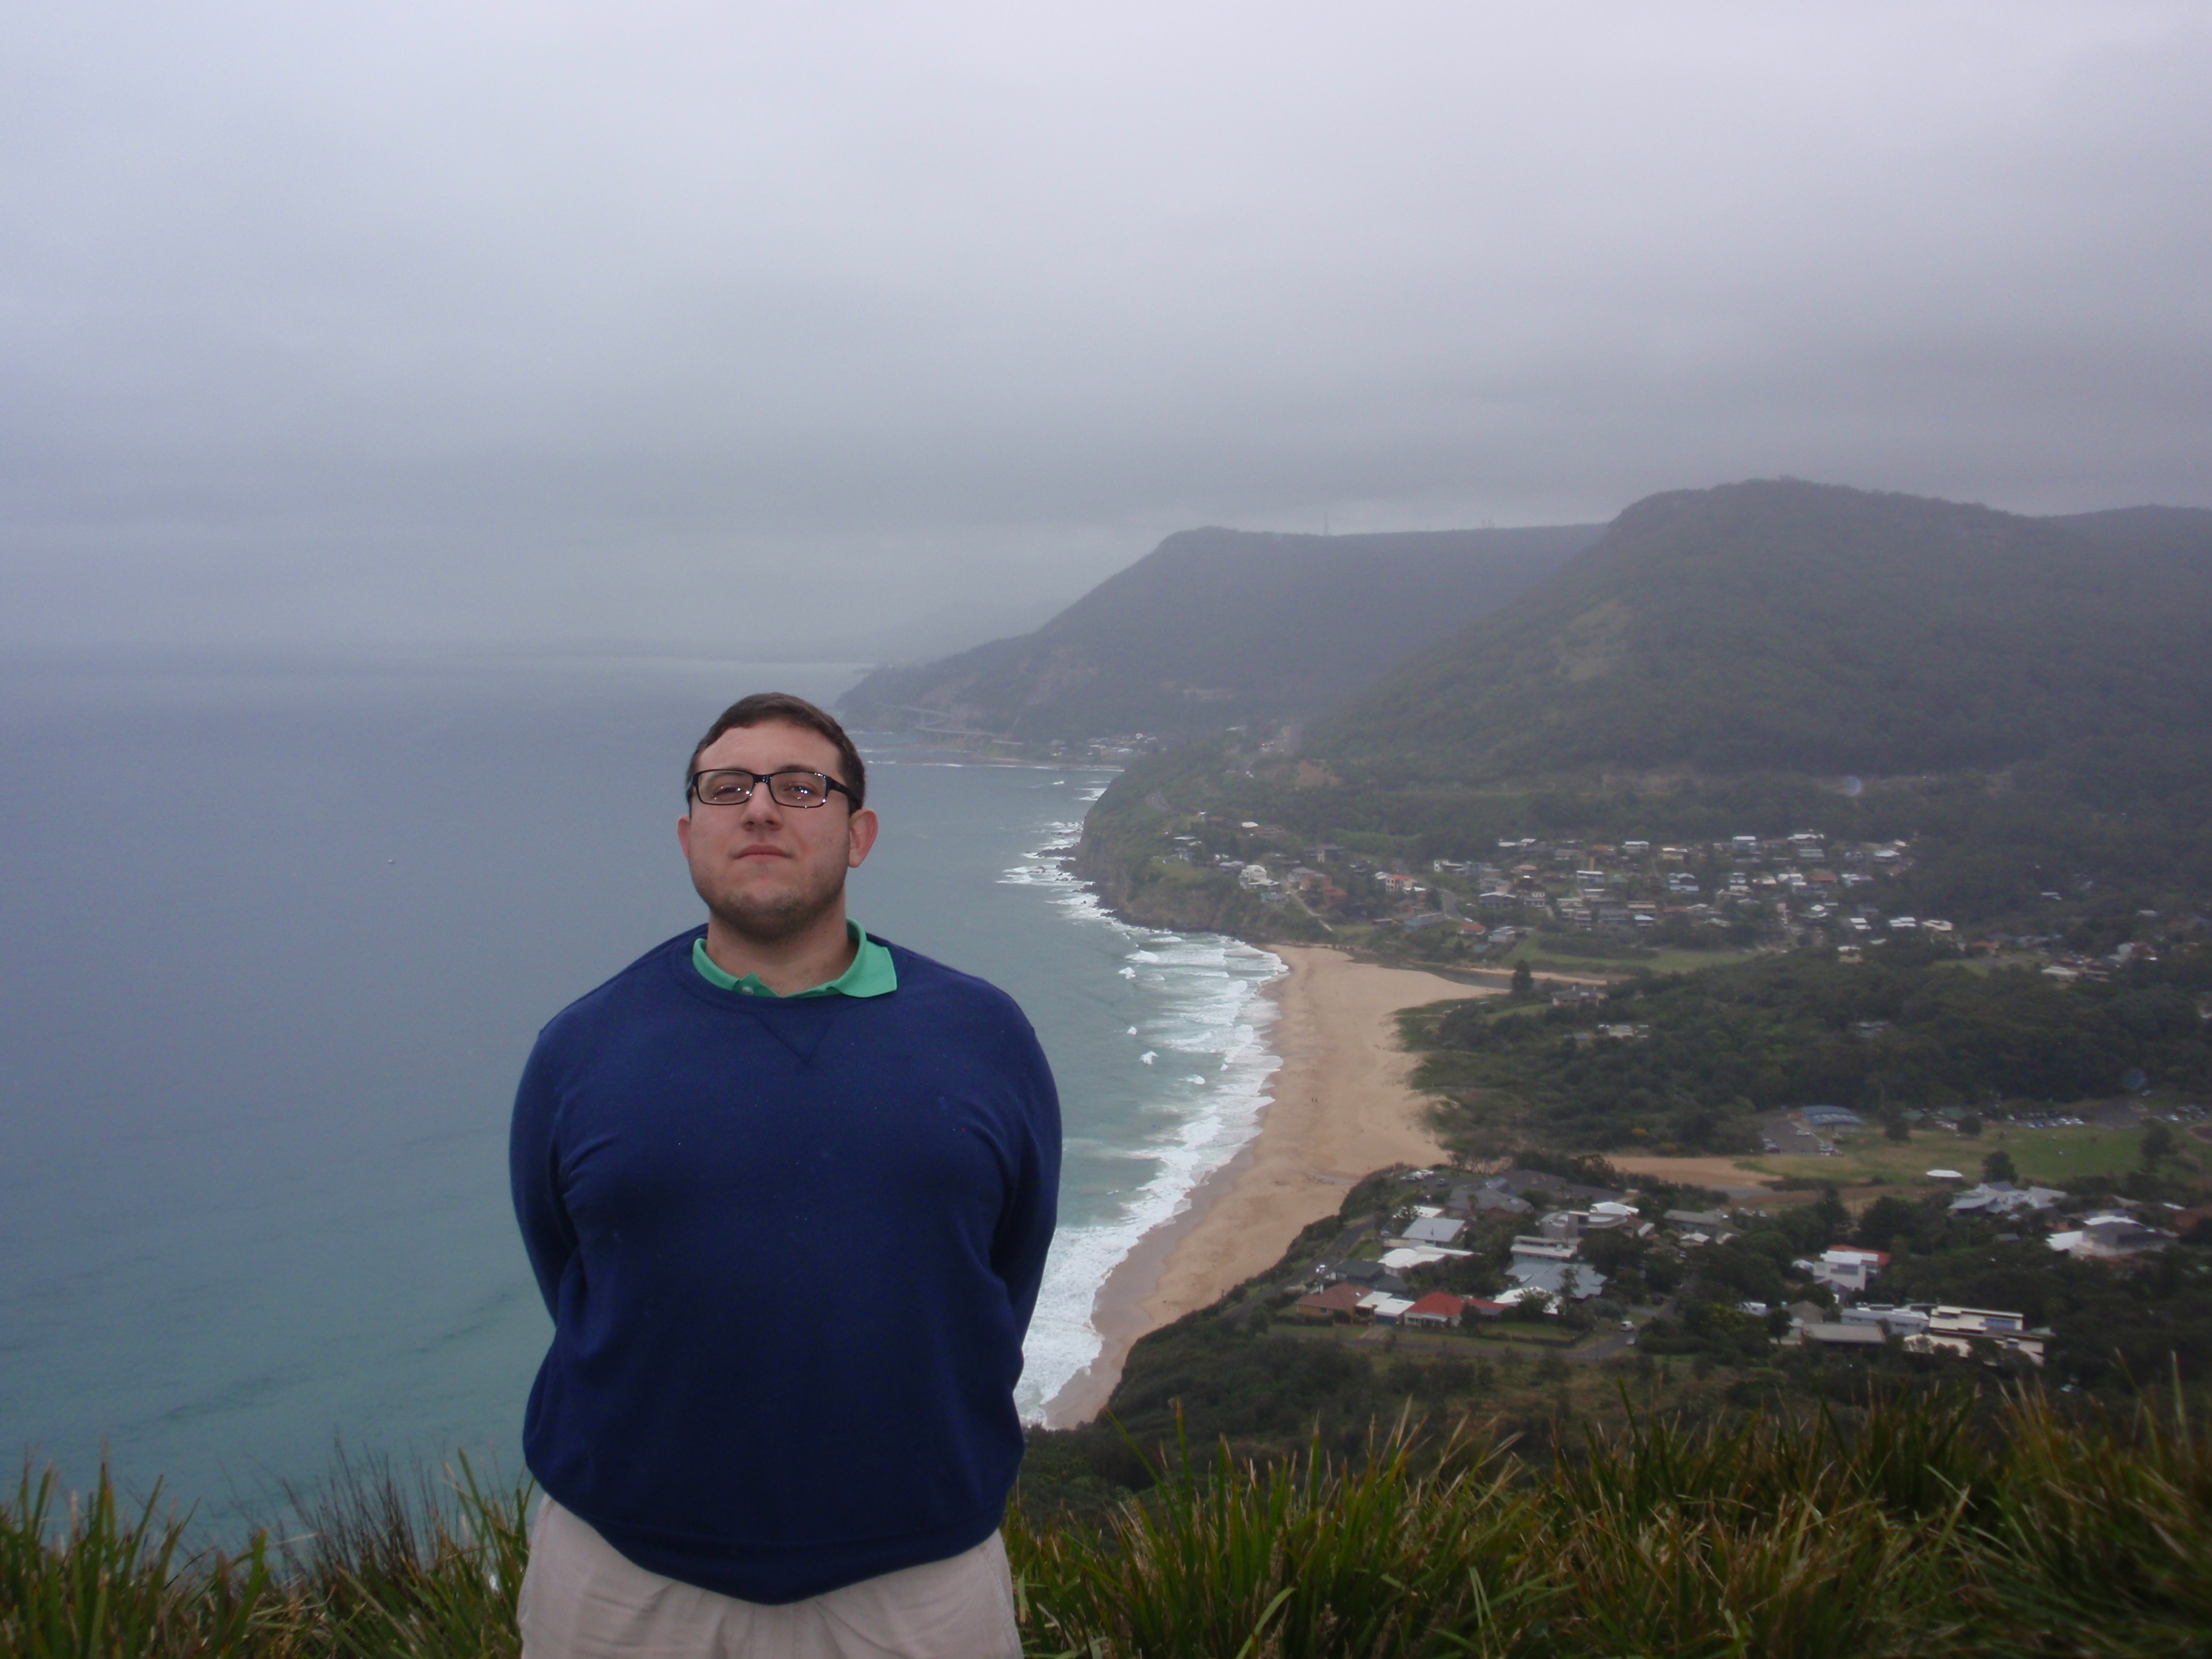 "Greetings from Bald Hill!"